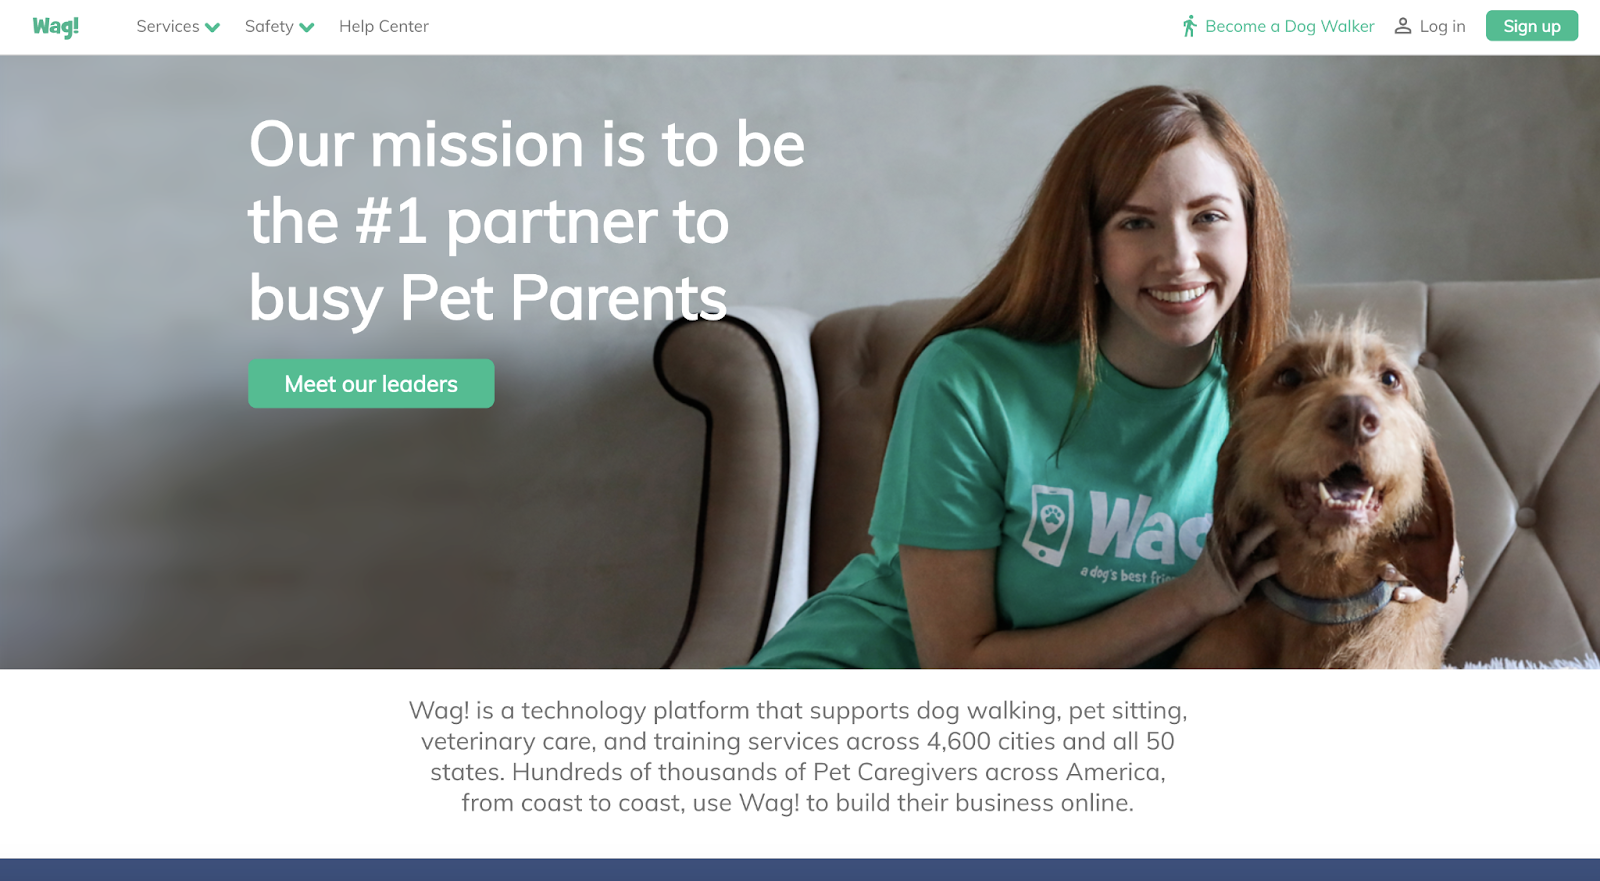 Wag shares its mission at the top of its About Us page.